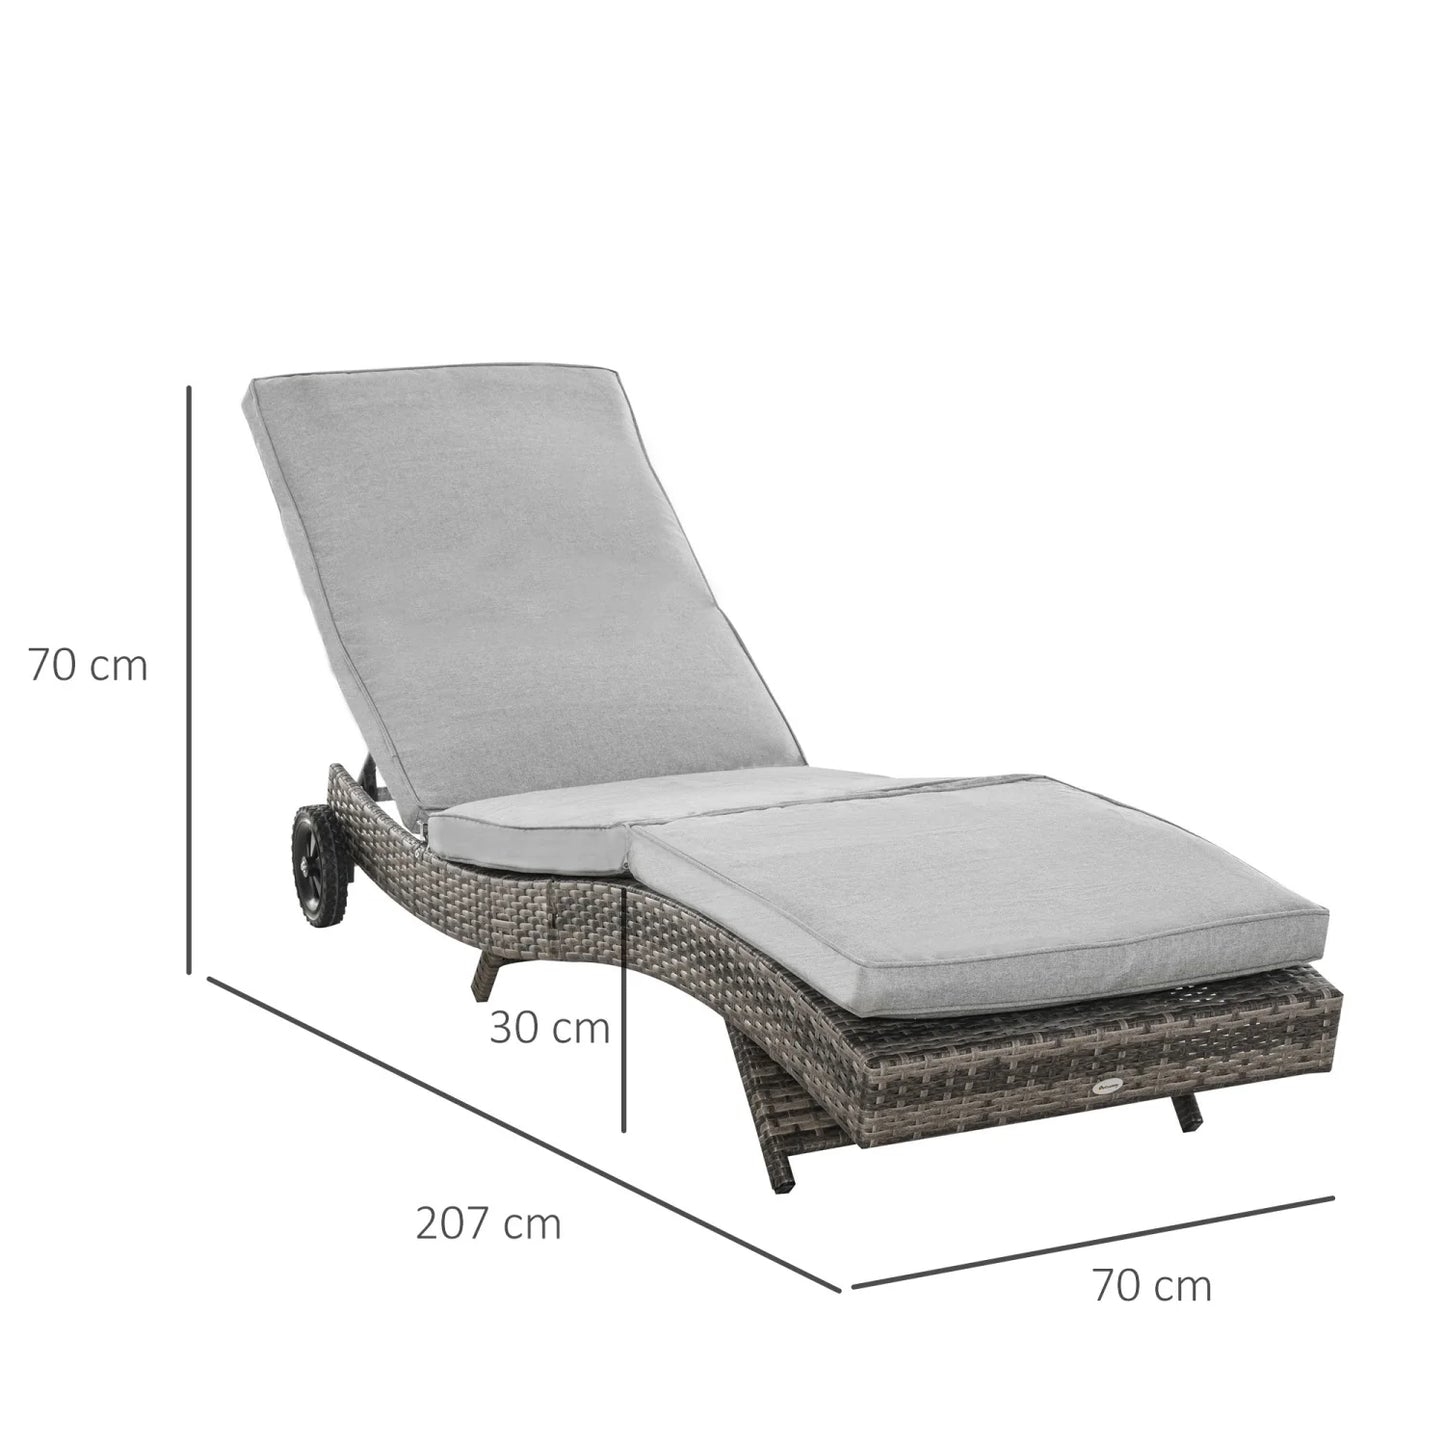 ZJbiubiuHome Chaise Lounge Pool Chair  Outdoor PE Rattan Cushioned Patio Sun Lounger w/ 5-Level Adjustable Backrest & Wheels for Easy Movement  Wicker  Mixed Gray